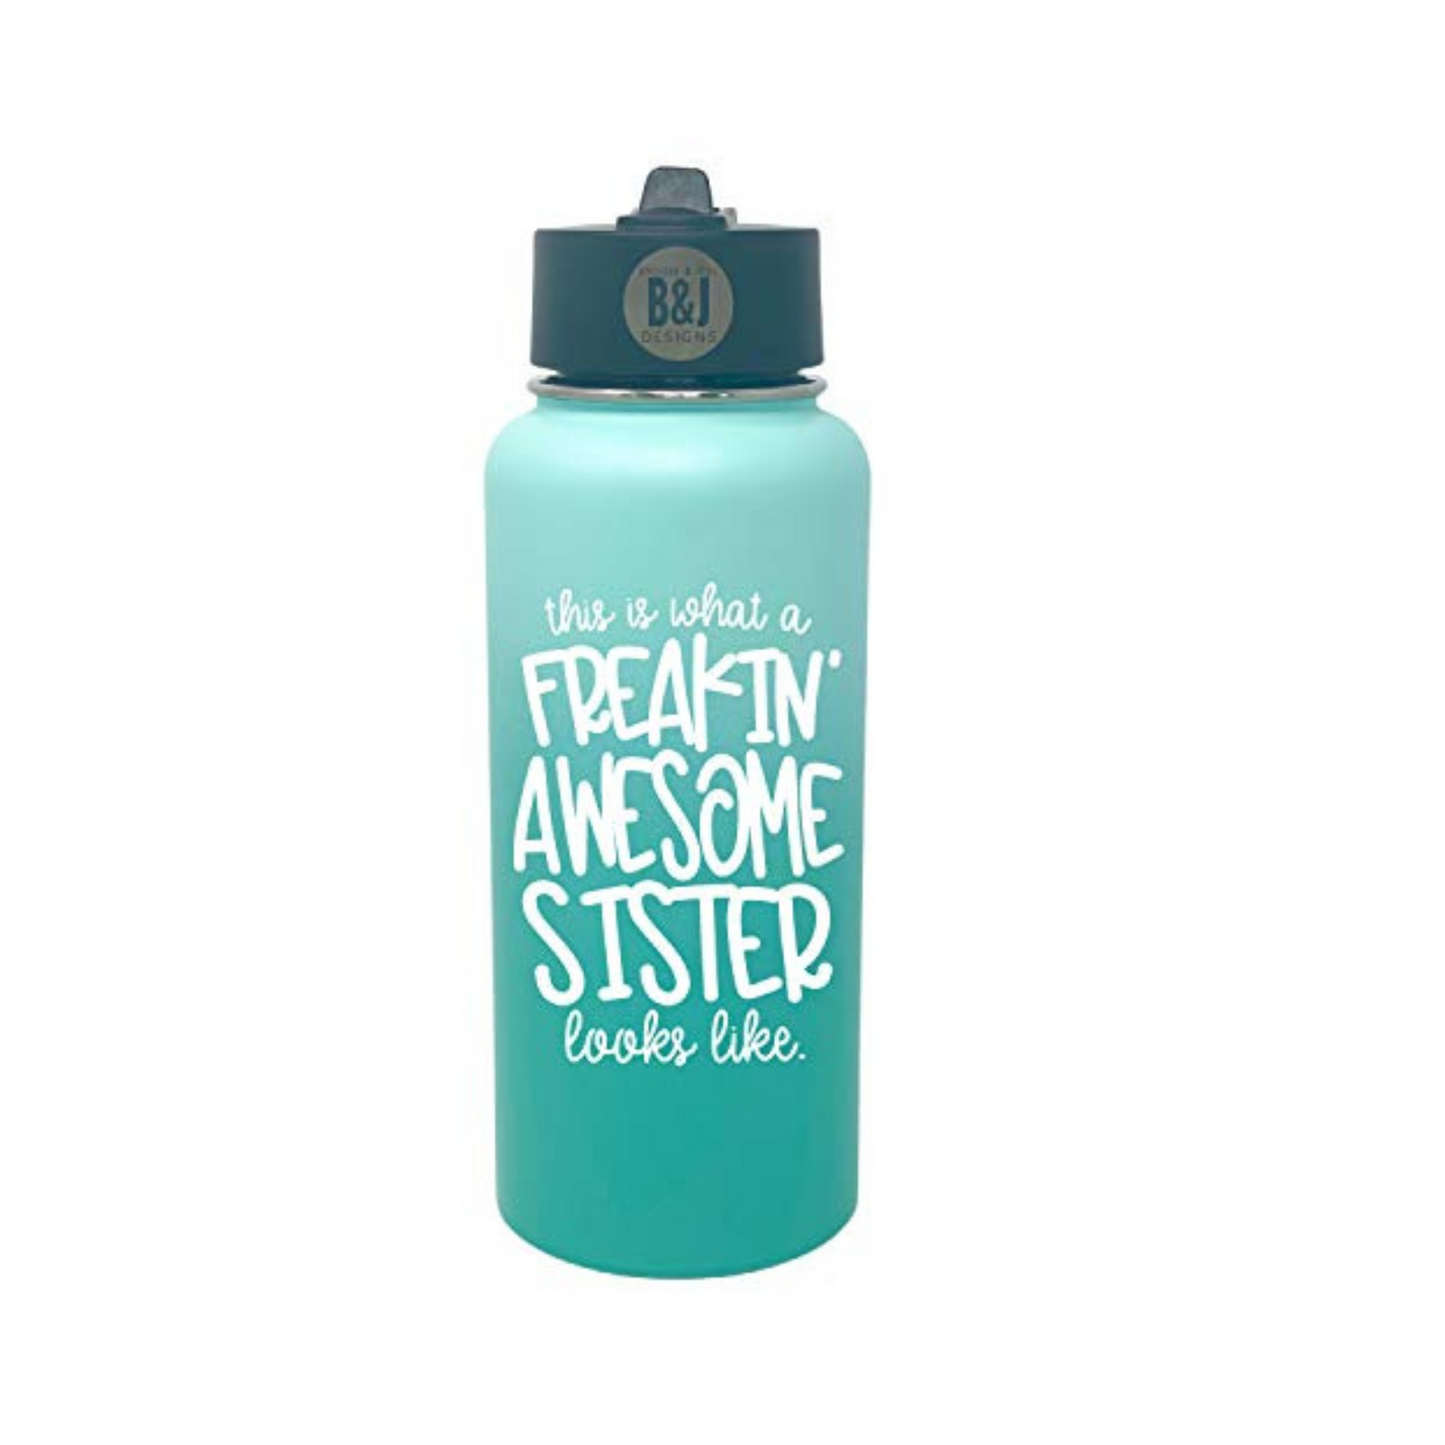 This is What a Freakin' Awesome Sister Looks Like Teal 32 oz Water Bottle